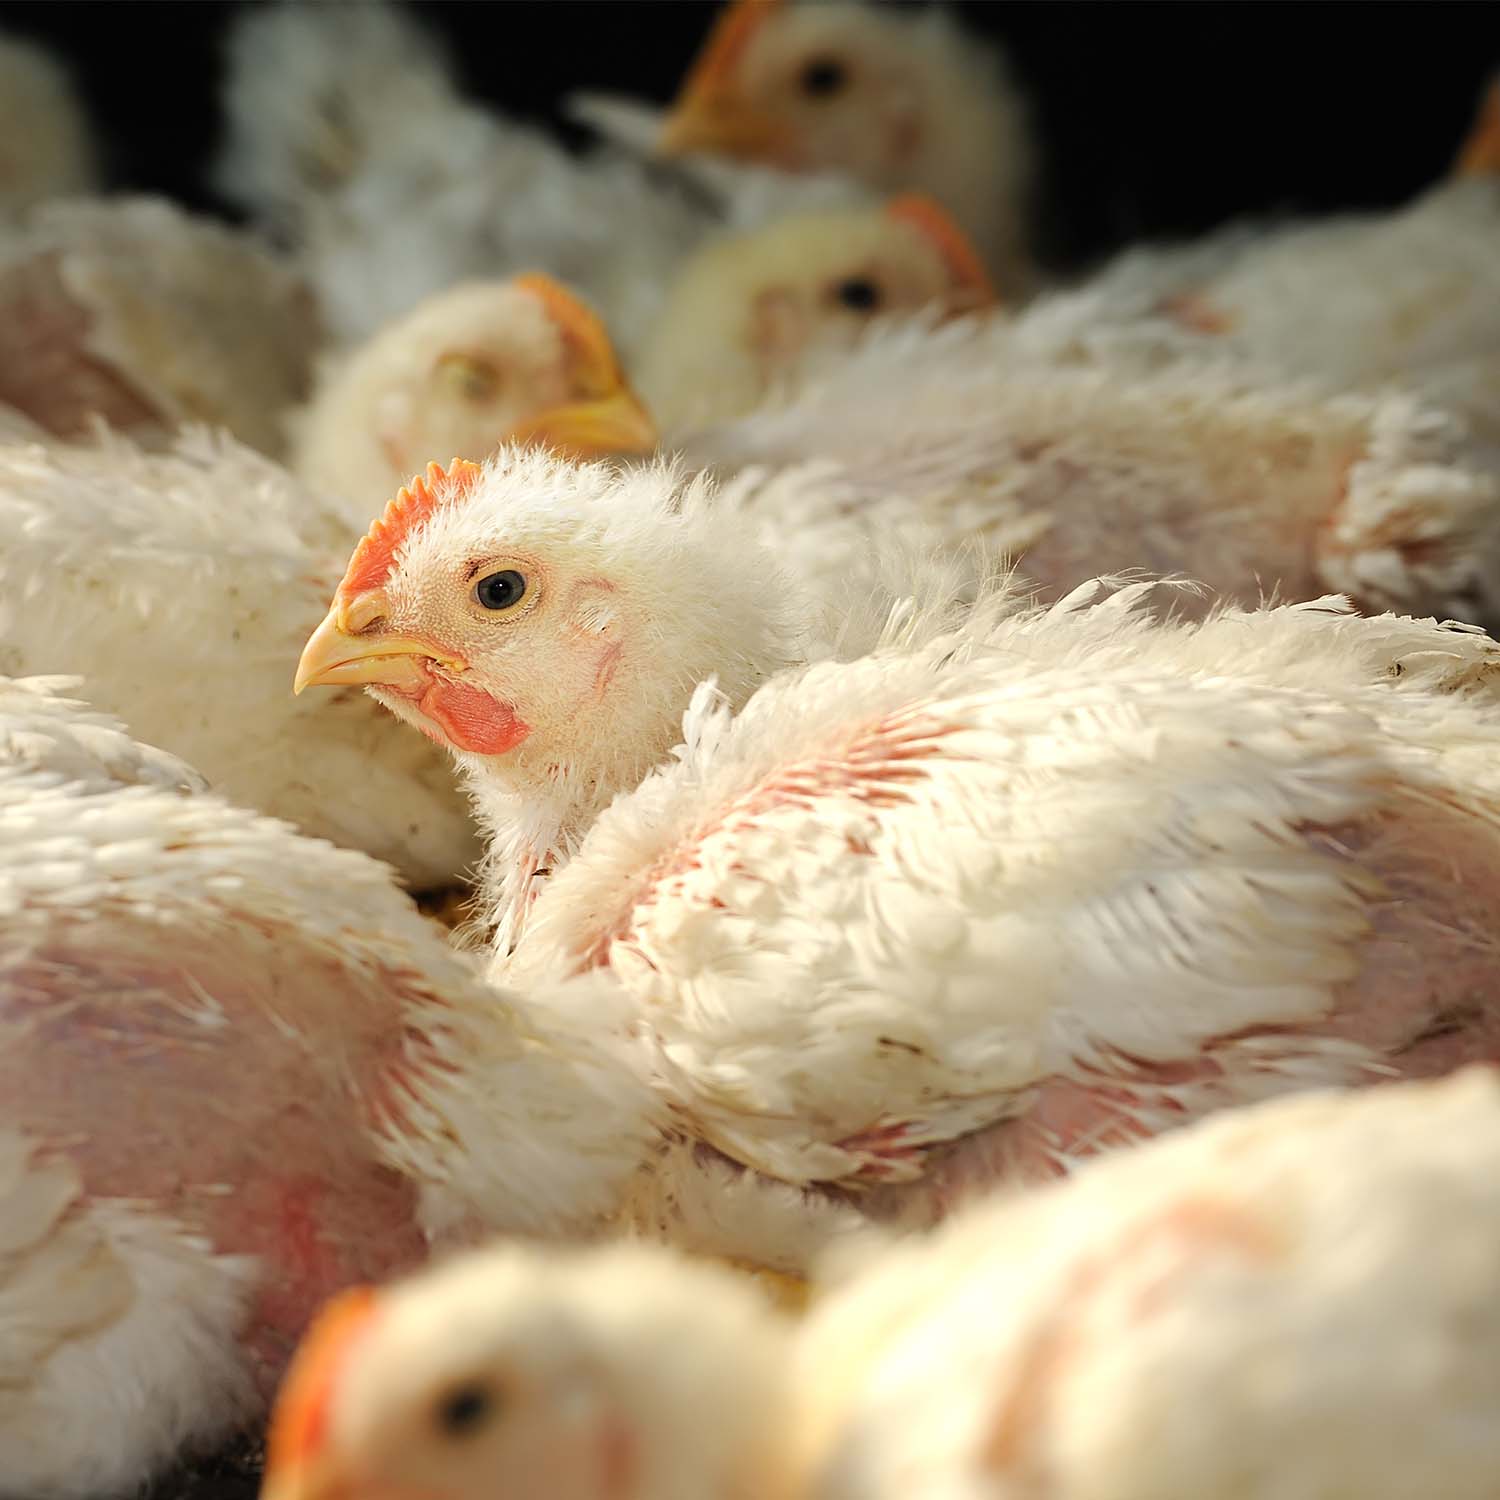 EU Commission Recognizes Plight of Fast-Growing Chickens for Meat